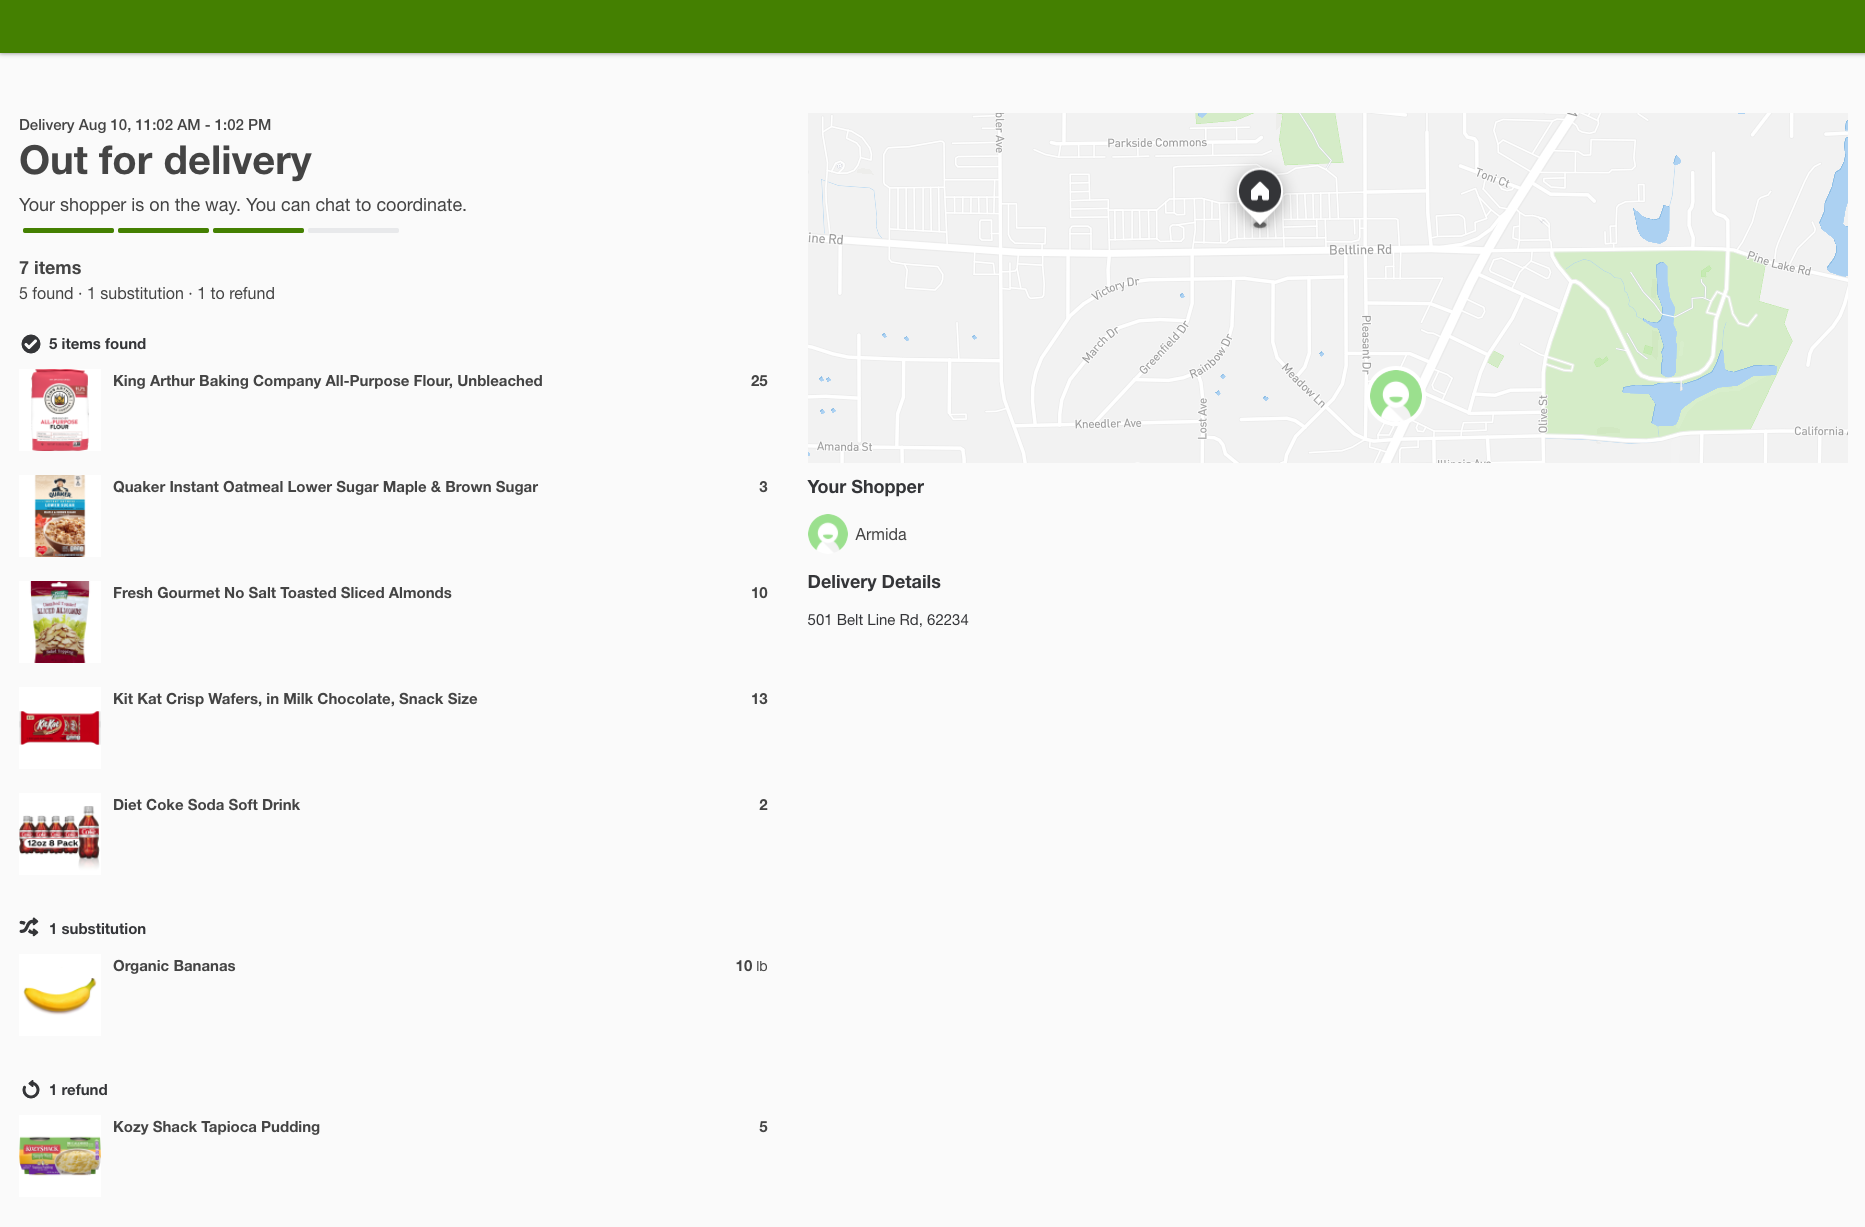 The image shows the Out for delivery page in a browser view. On the left is the delivery date and time, the status, and the items in the order with 5 found, 1 replacement, and 1 refund. On the right is the map with both the customer and shopper locations, the shopper&#39;s name Amida, and a delivery address of 501 Belt Line Rd. 62234.